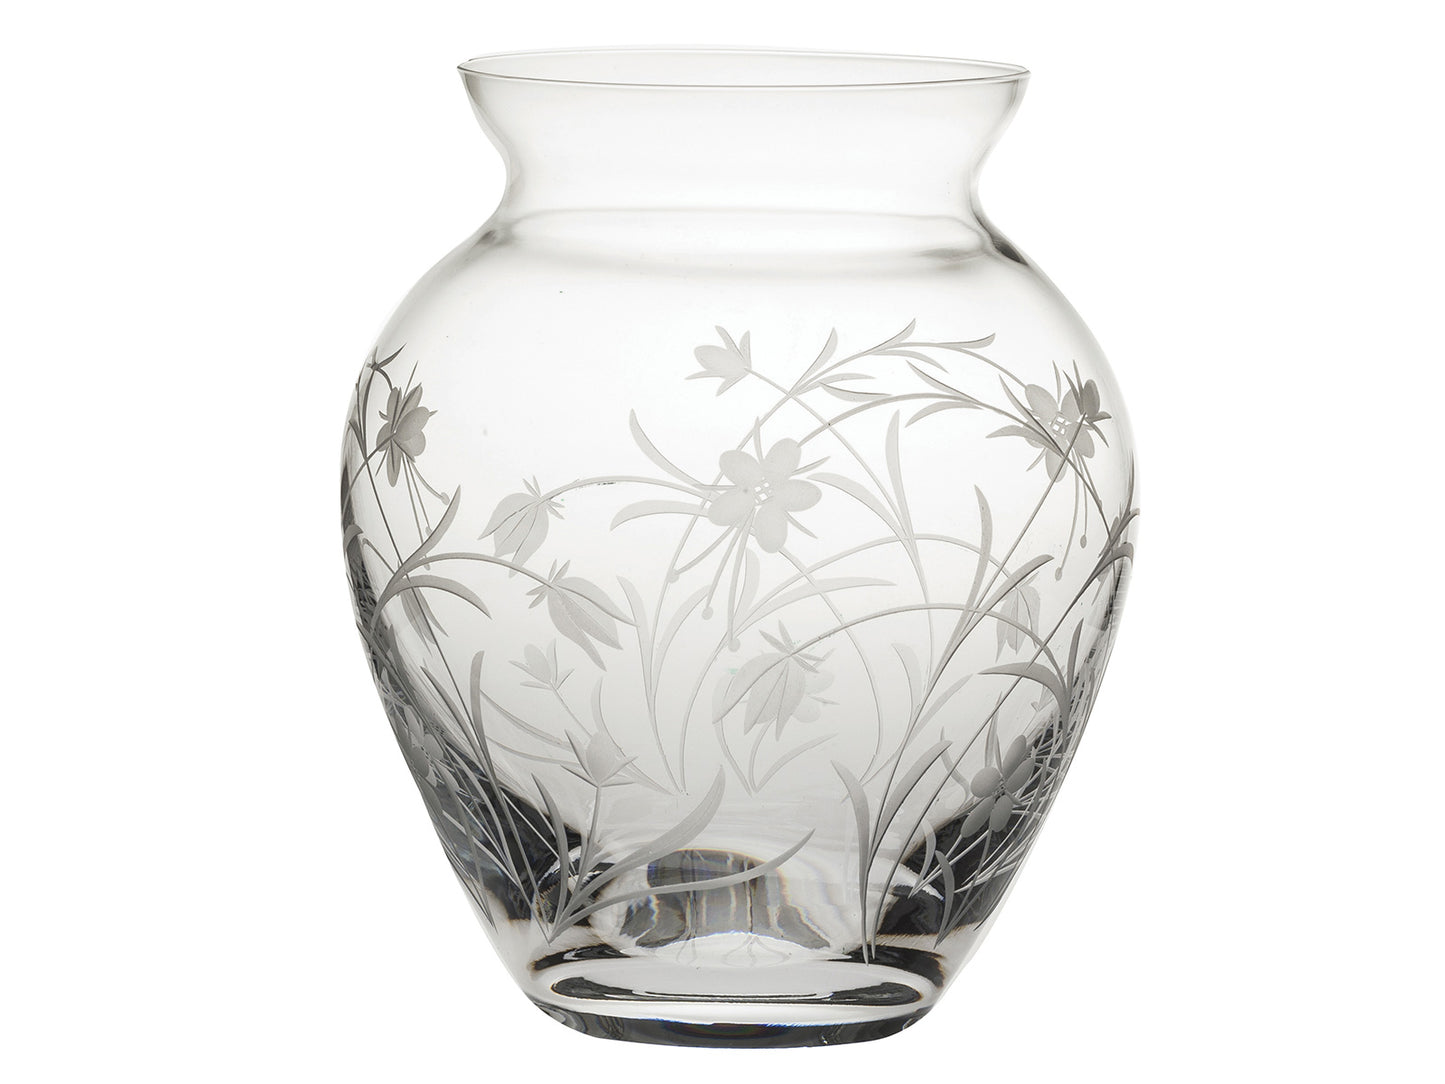 A curvaceous posy vase with a cinched high waist, engraved with a frosted wildflower motif around the outside